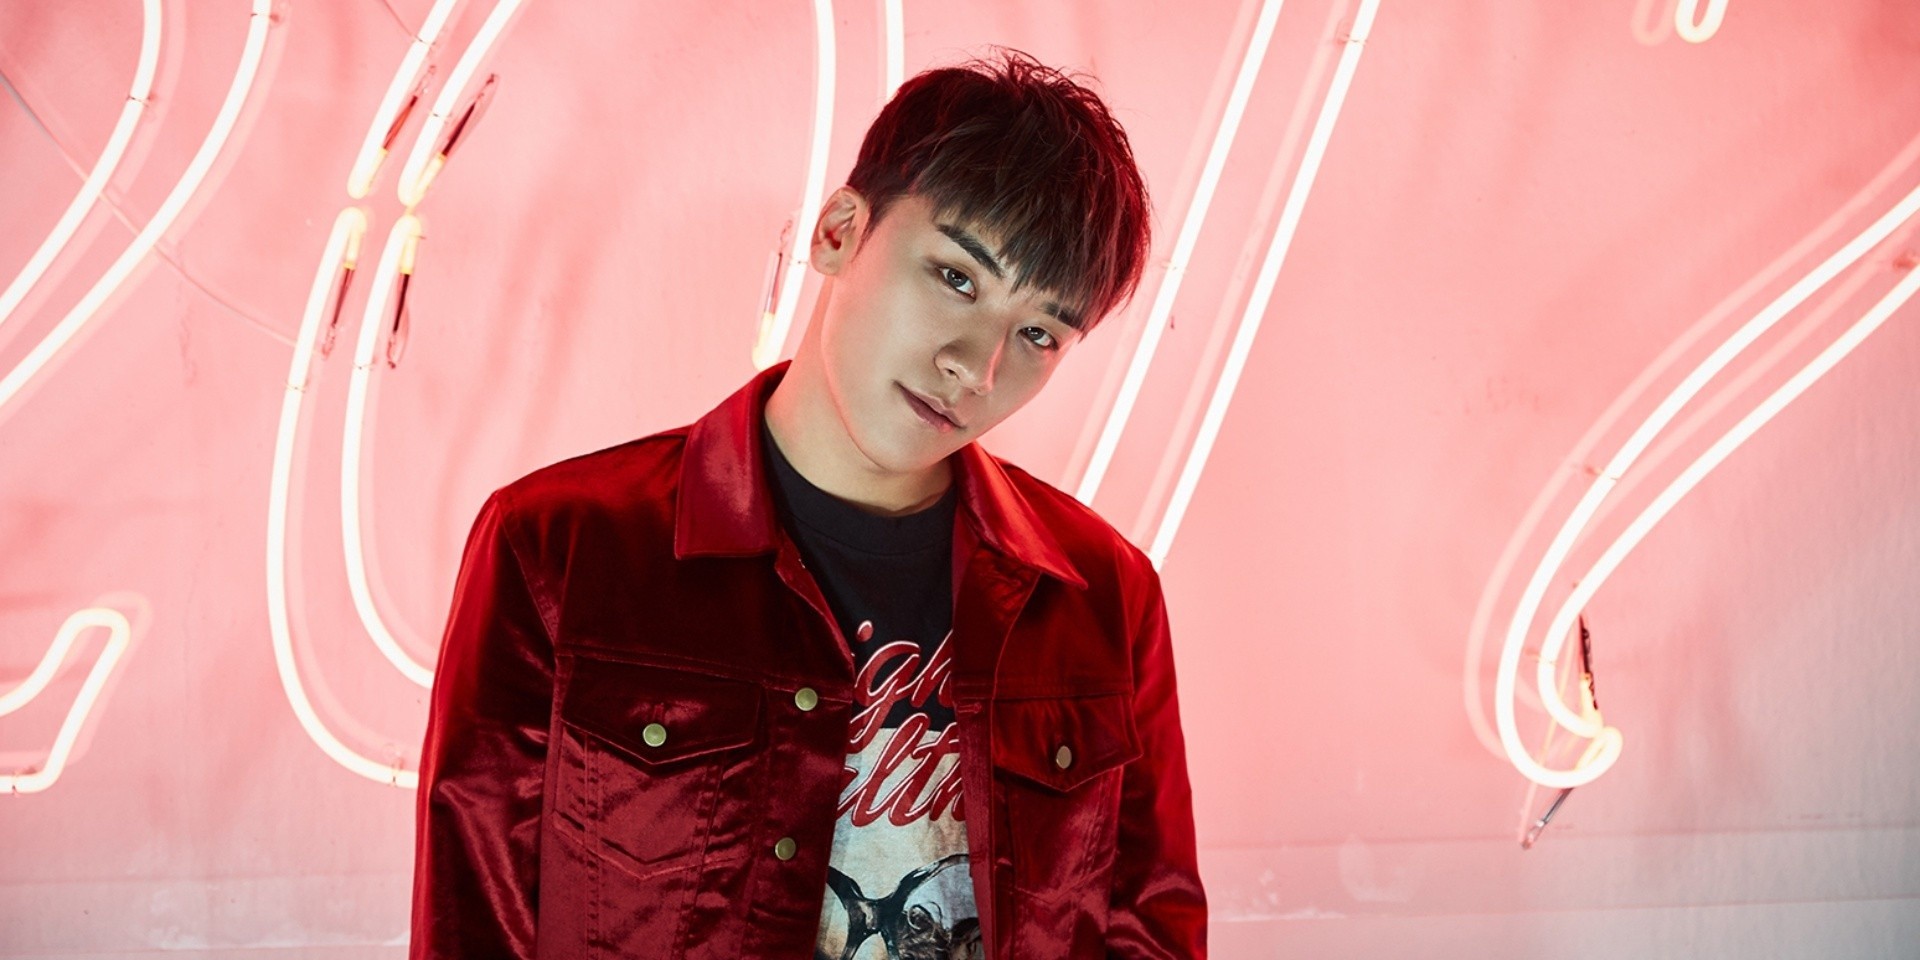 Seungri, the youngest member of BIGBANG, spearheads Singapore's first full-fleged VR theme park